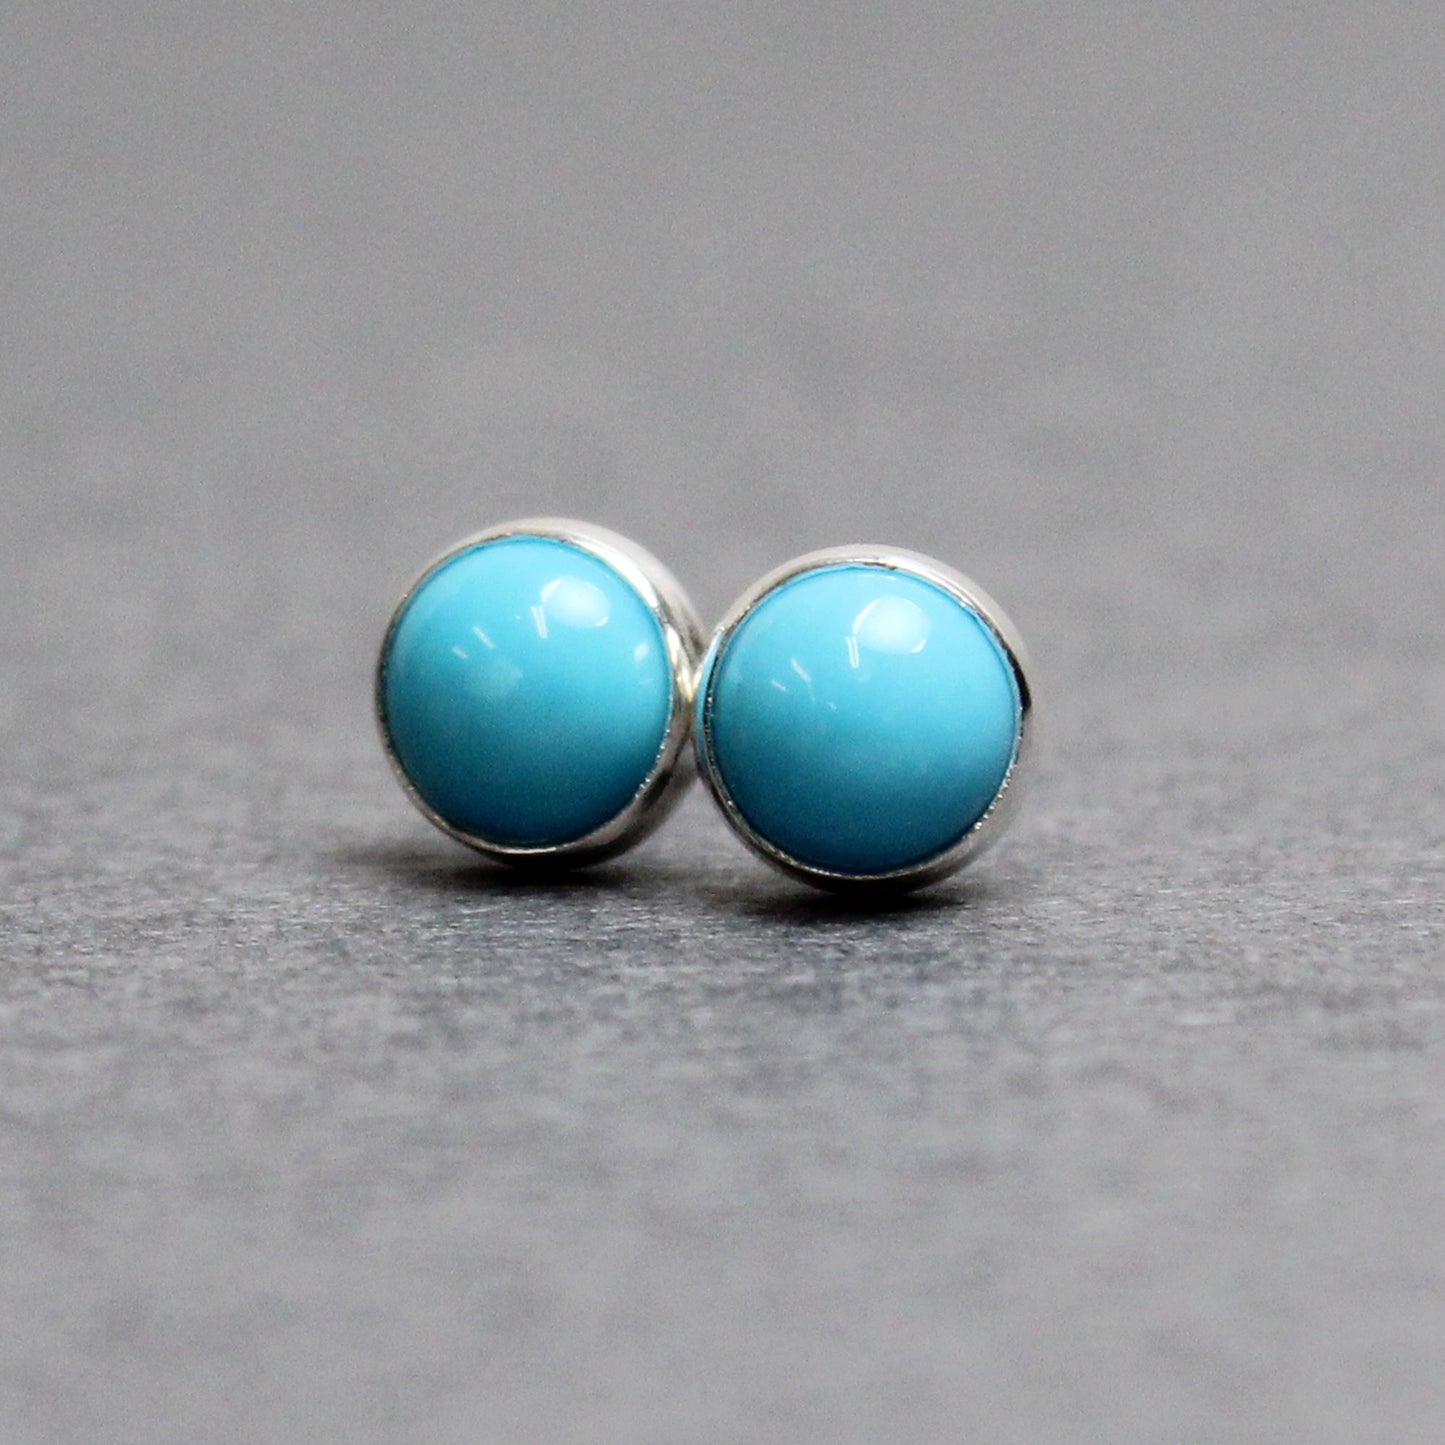 Buy Turquoise 3 Stone Stud Earrings , Tiny Studs, Small Studs, Trio Studs, Turquoise  Earrings, Dainty Studs, Cartilage Studs, Trinity Stud Online in India - Etsy